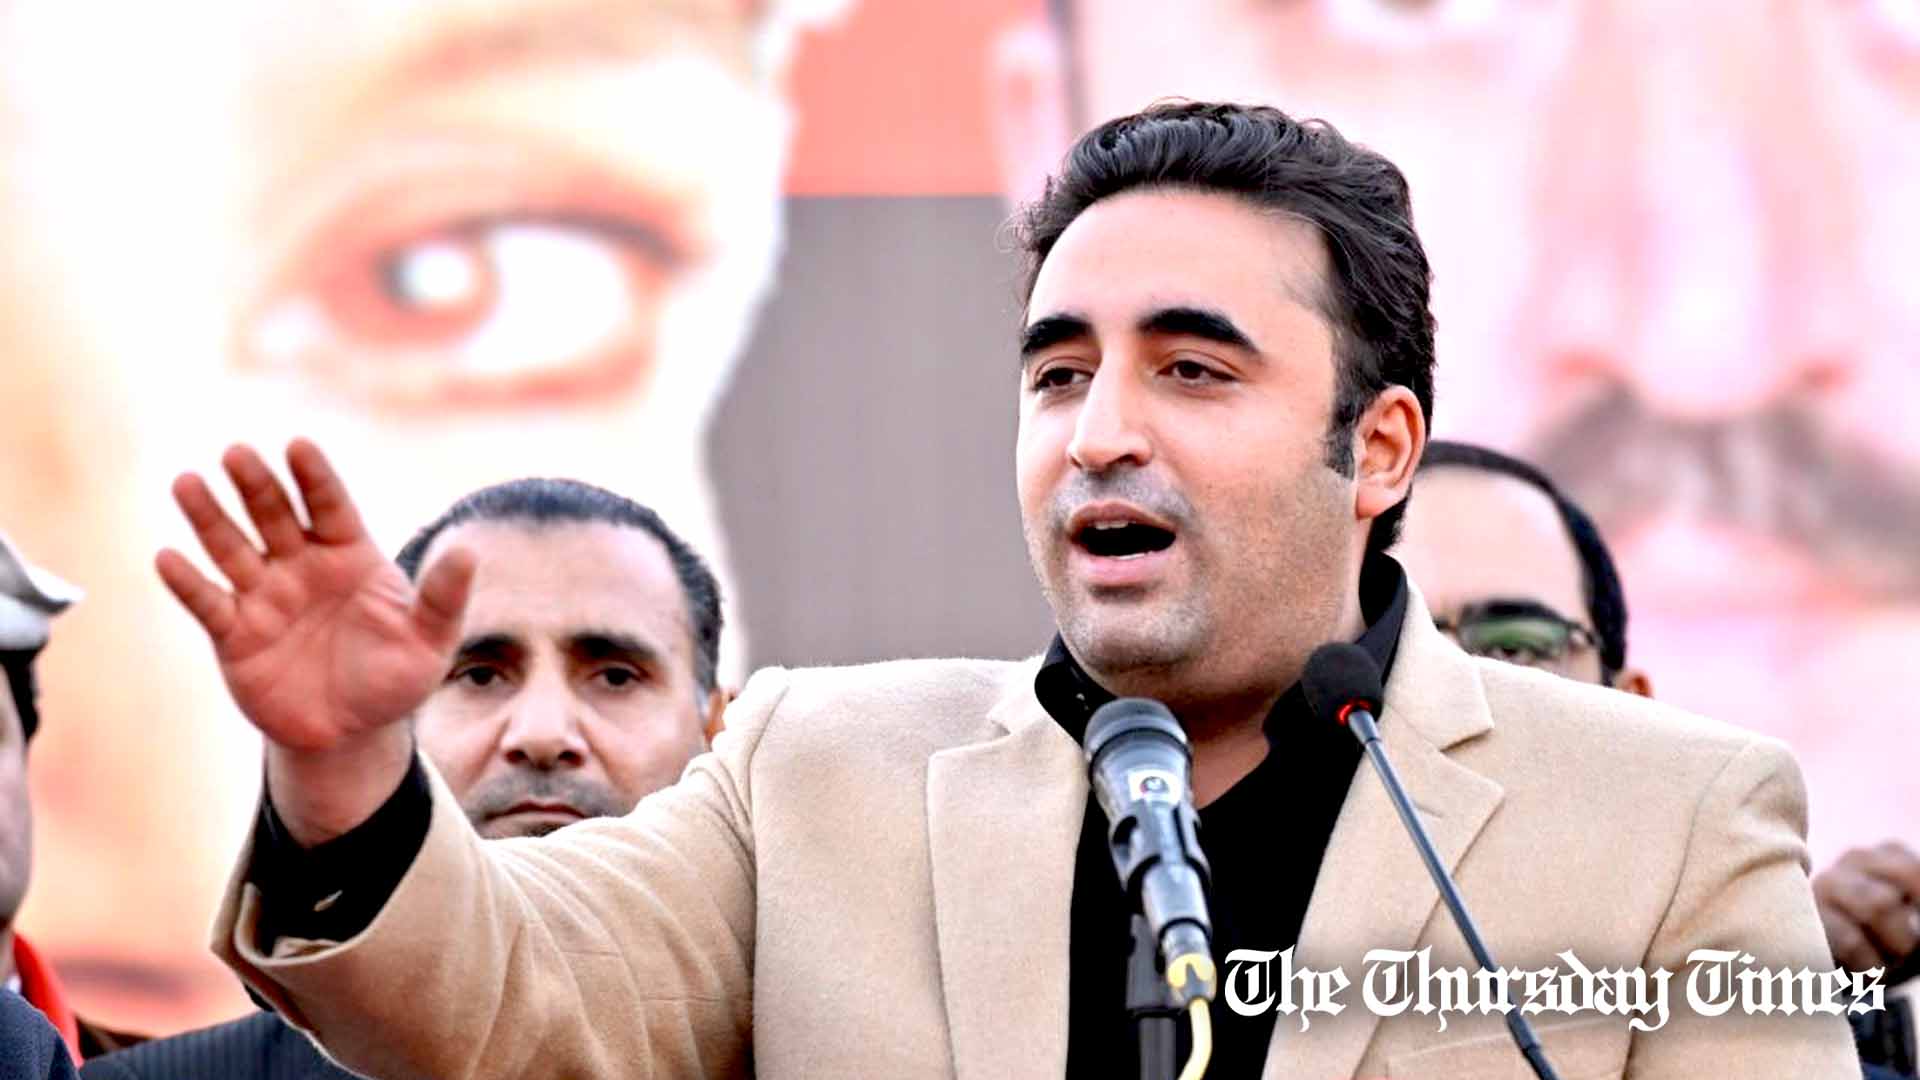 A file photo is shown of PPP chair and former Pakistani foreign minister Bilawal Bhutto-Zardari at Nowshera on November 20, 2013. — FILE/THE THURSDAY TIMES